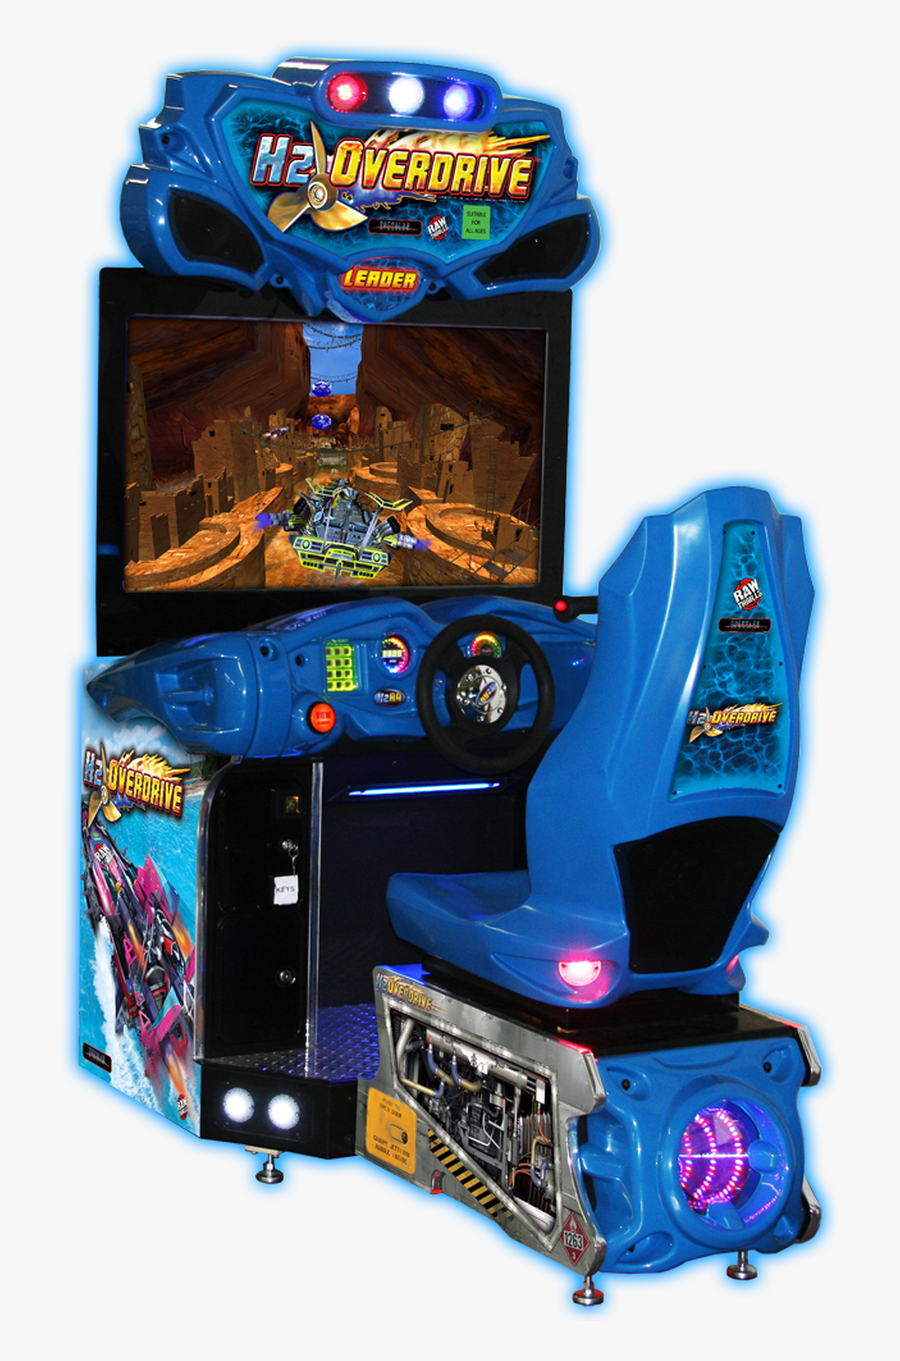 Speed Boat Arcade Game - H20 Overdrive Arcade Game, Transparent Clipart